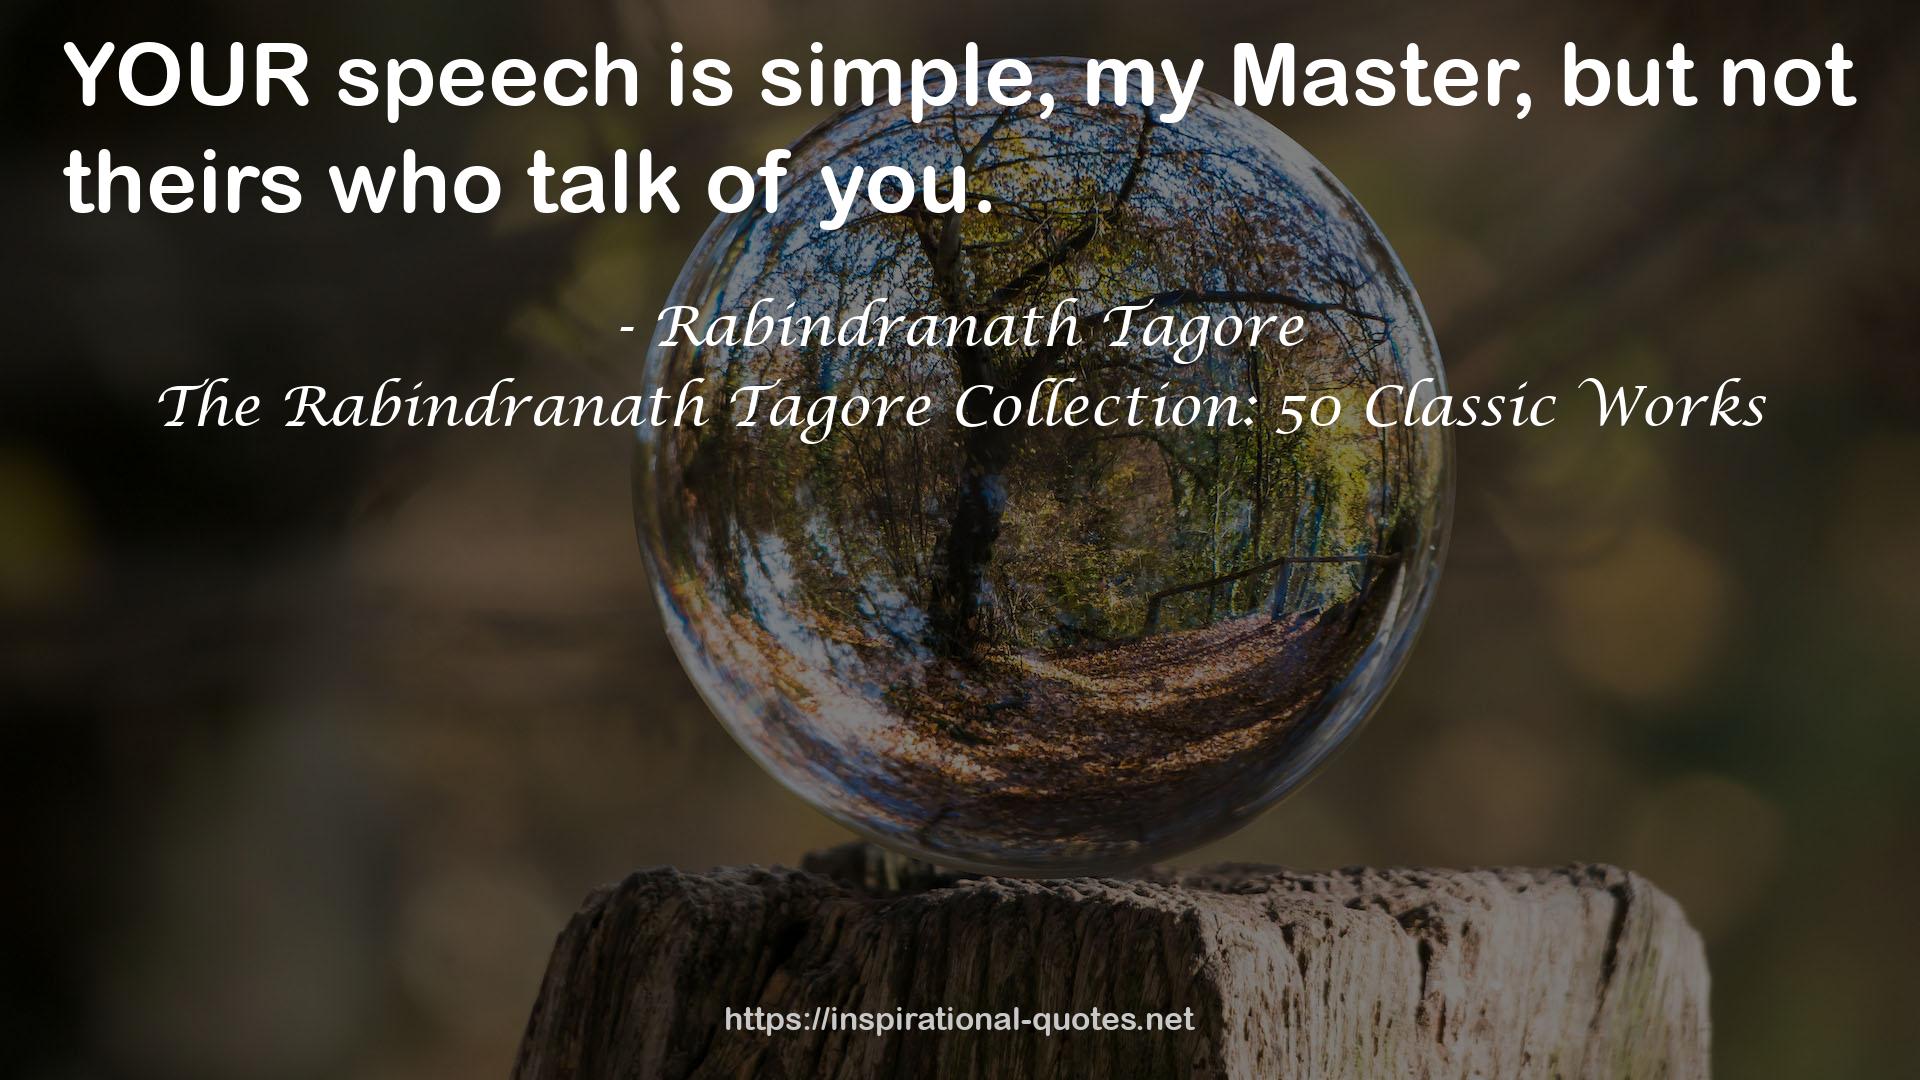 The Rabindranath Tagore Collection: 50 Classic Works QUOTES